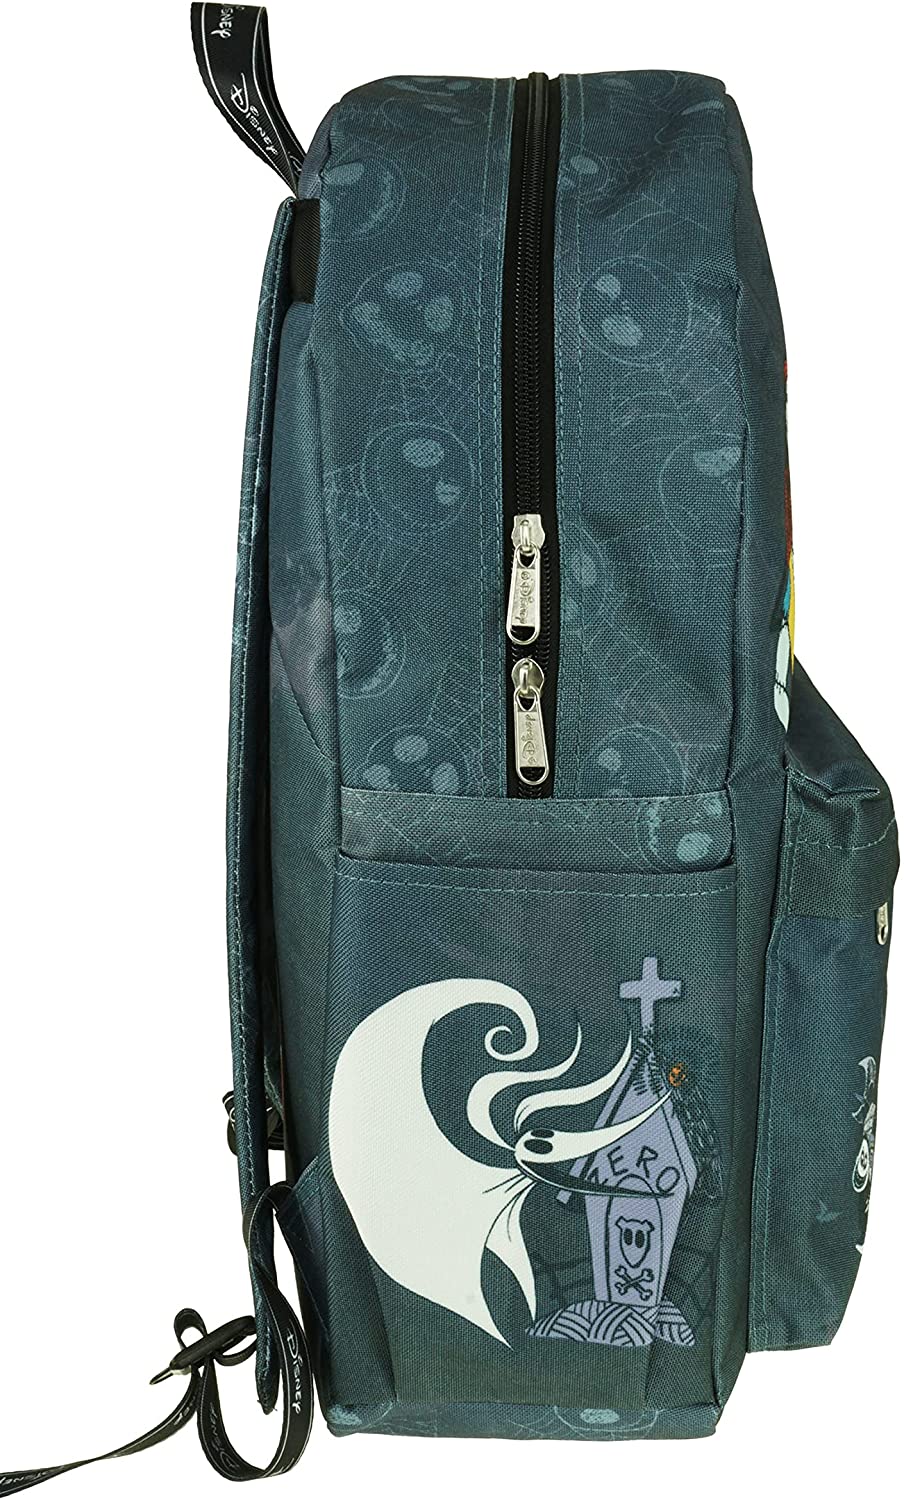 Classic Disney Nightmare Before Christmas Backpack with Laptop Compartment for School - Color - GTE Zone